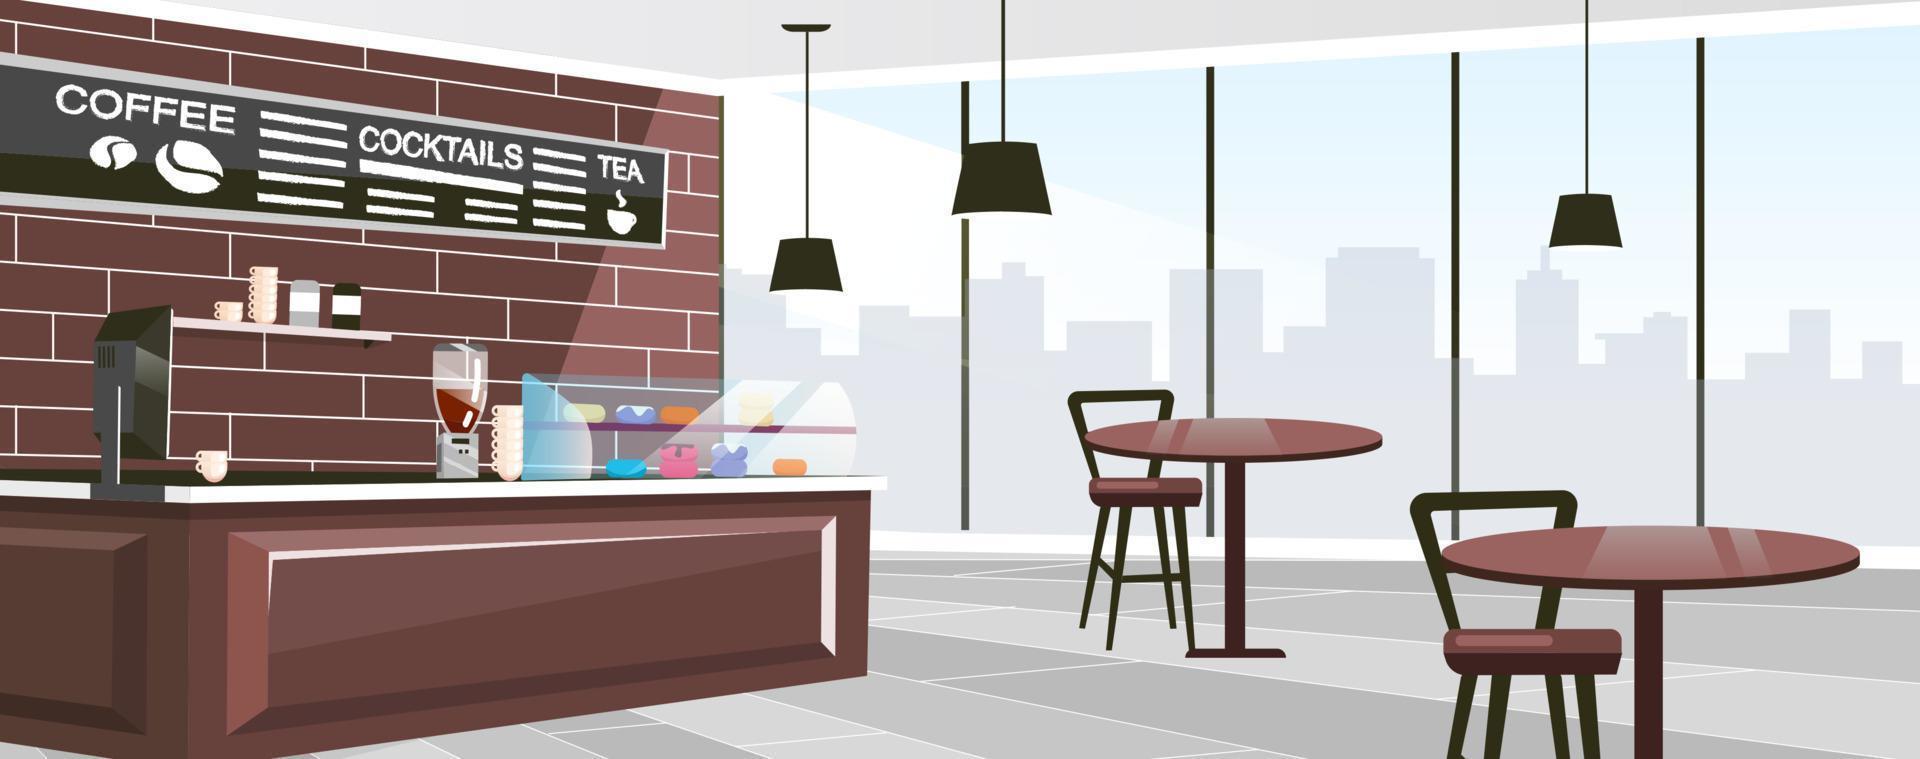 Urban cafe space flat vector illustration. Panoramic windows of modern coffee shop. Cartoon wooden counter, glass showcase with desserts. Trendy chalkboard menu with coffee, tea, cocktails list